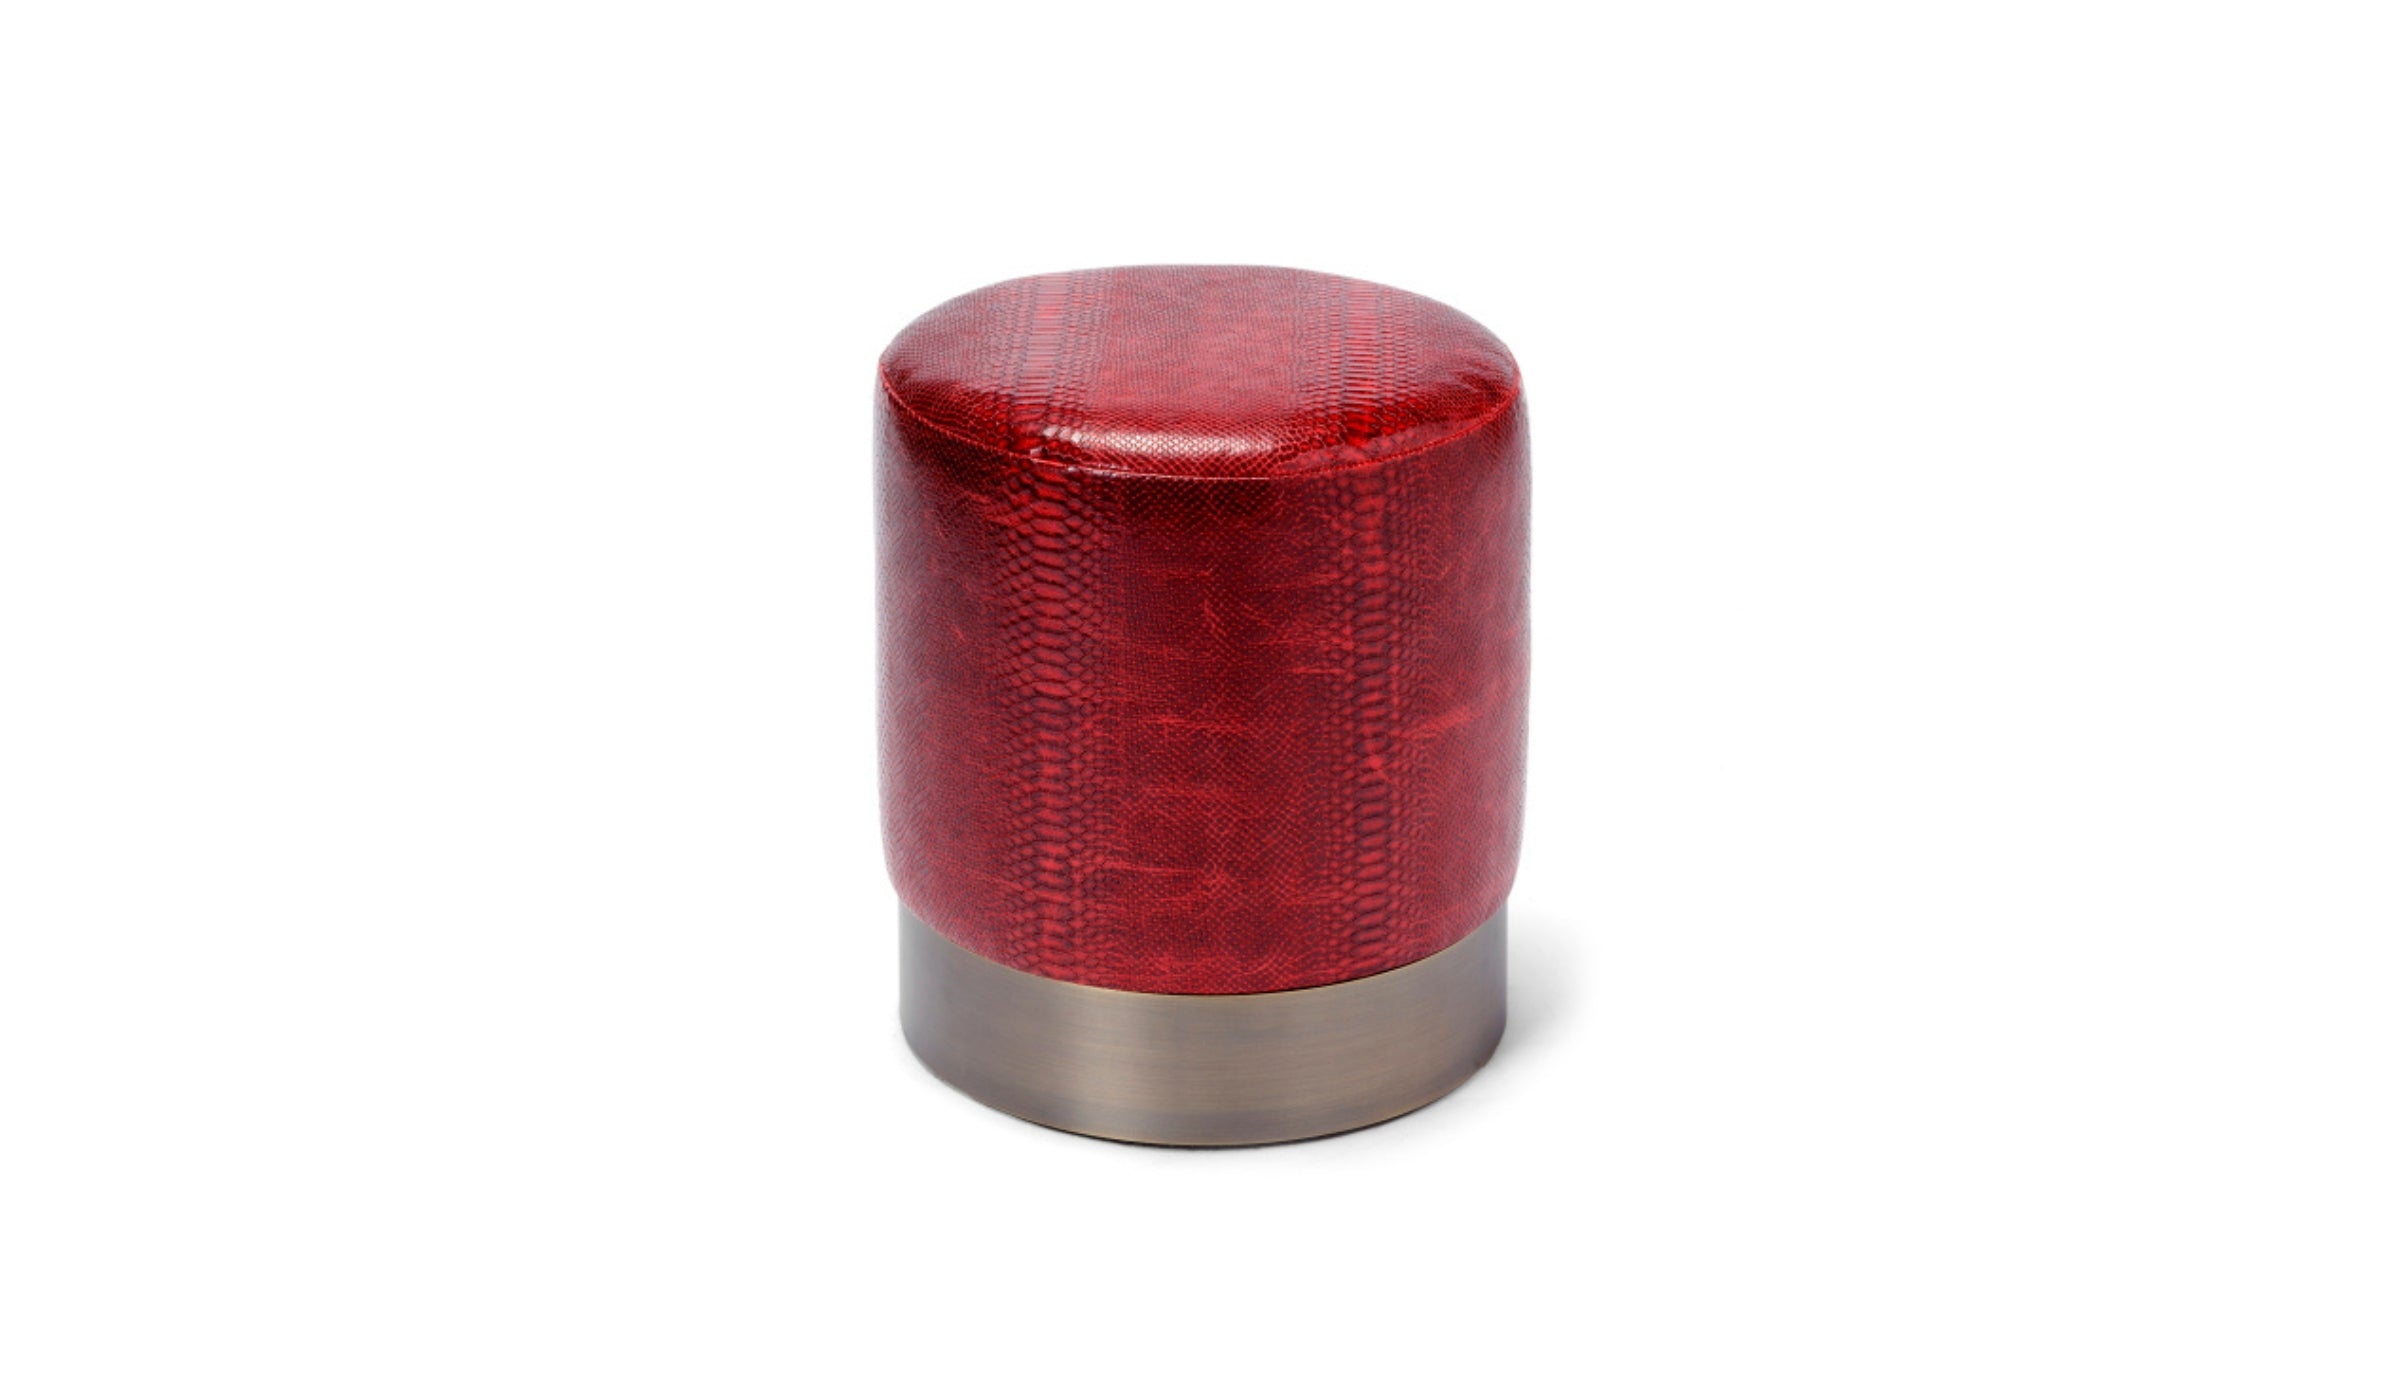 Lune C - Red and bronze leather pouf